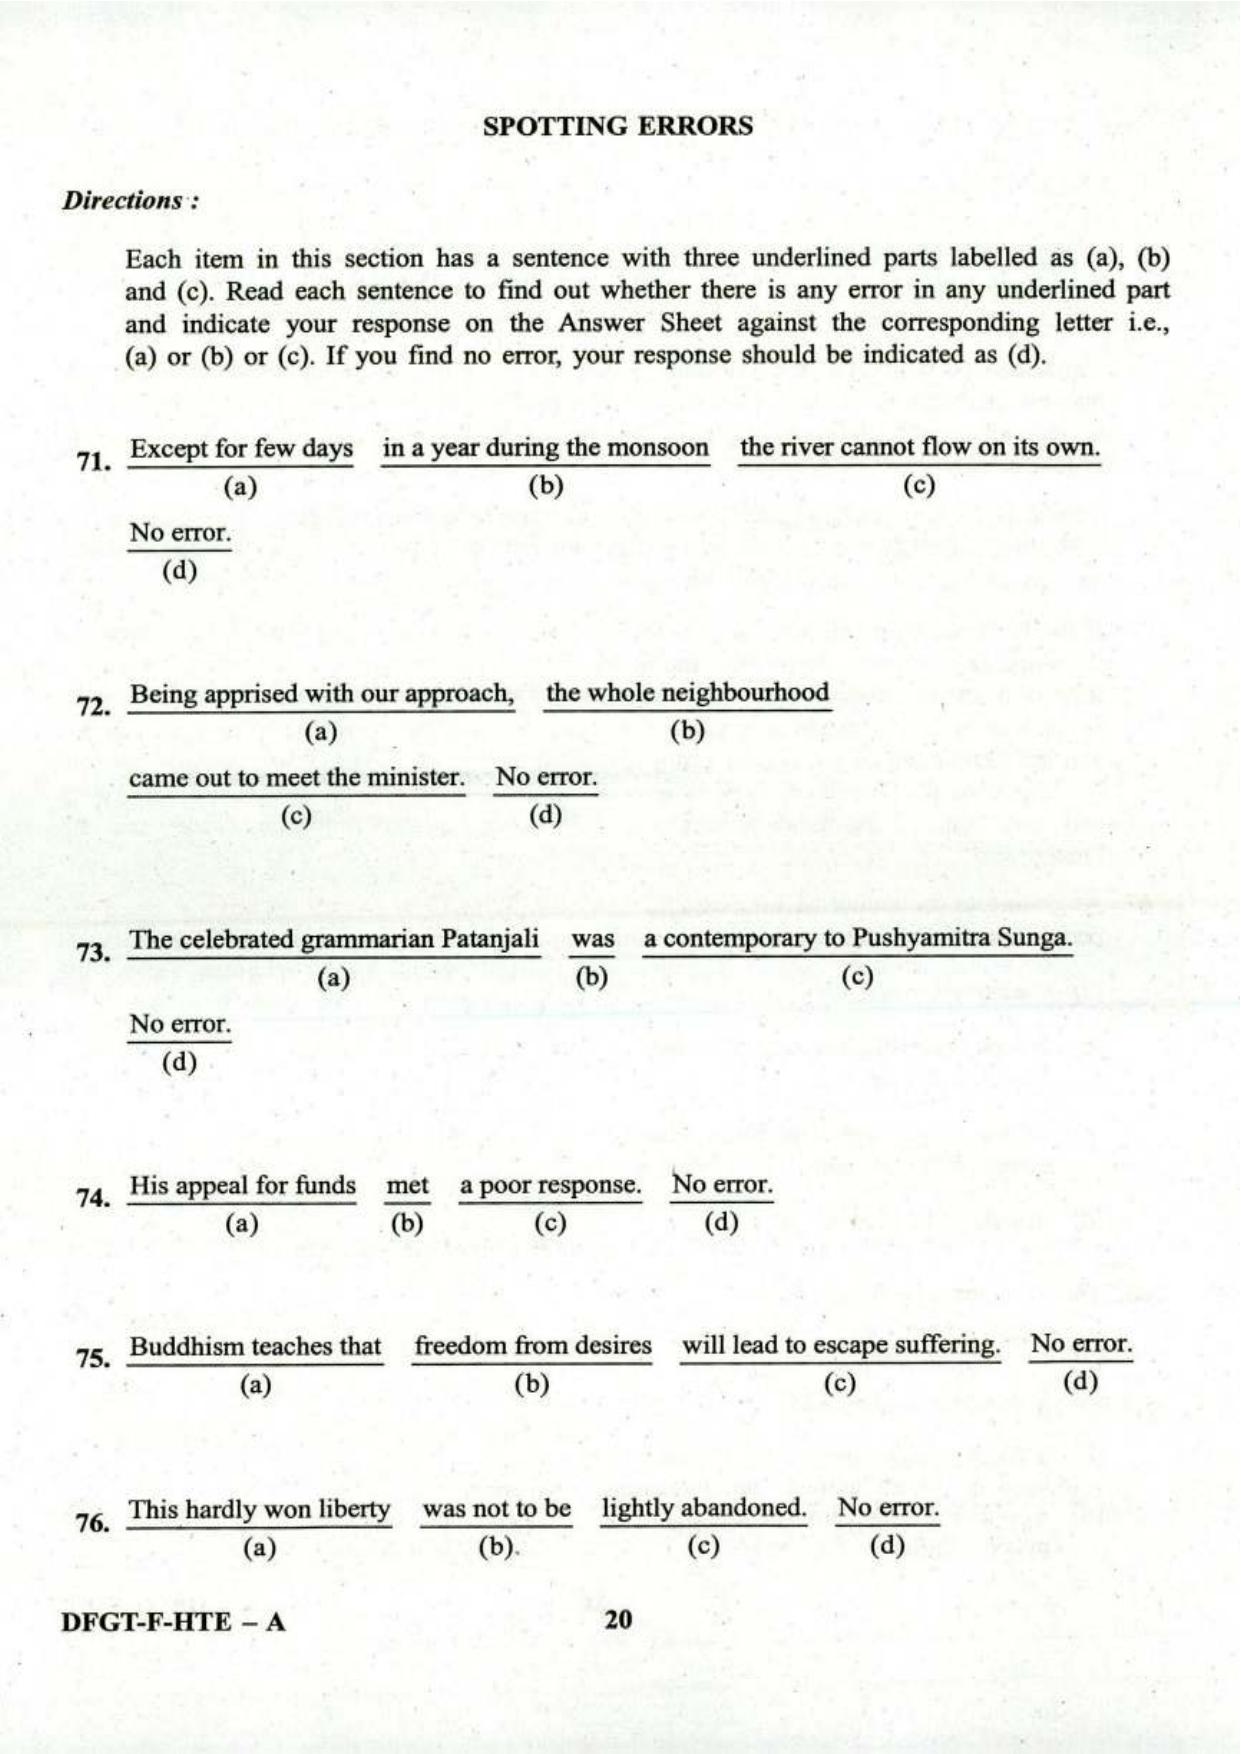 PBSSD General English Old Papers For BLS, PADEO, SPDM, and DPM - Page 20